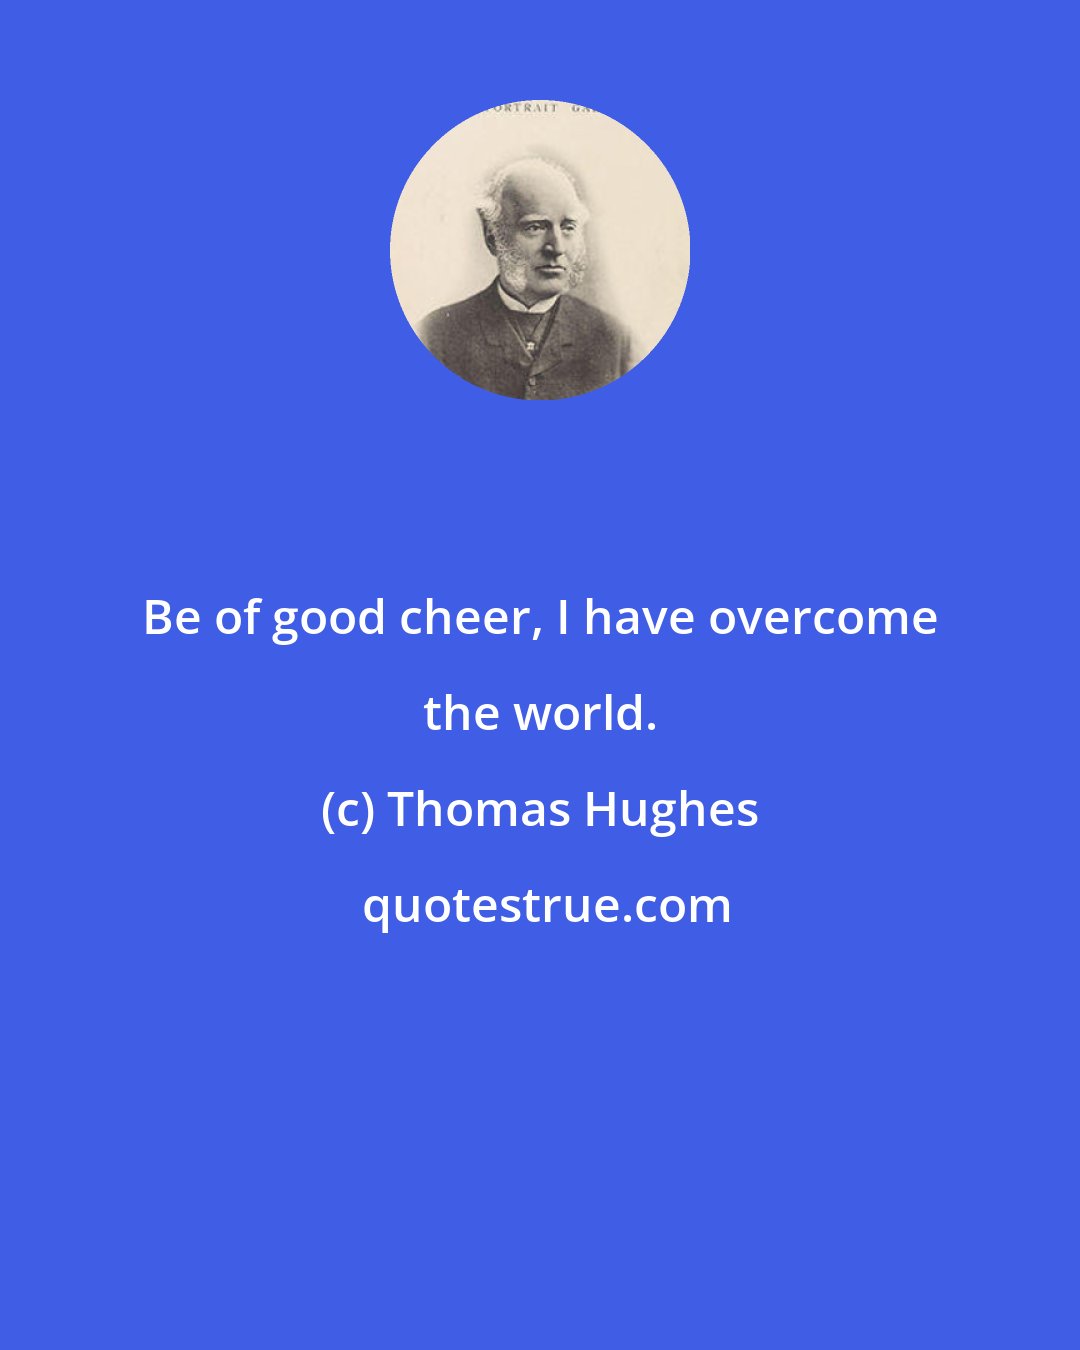 Thomas Hughes: Be of good cheer, I have overcome the world.